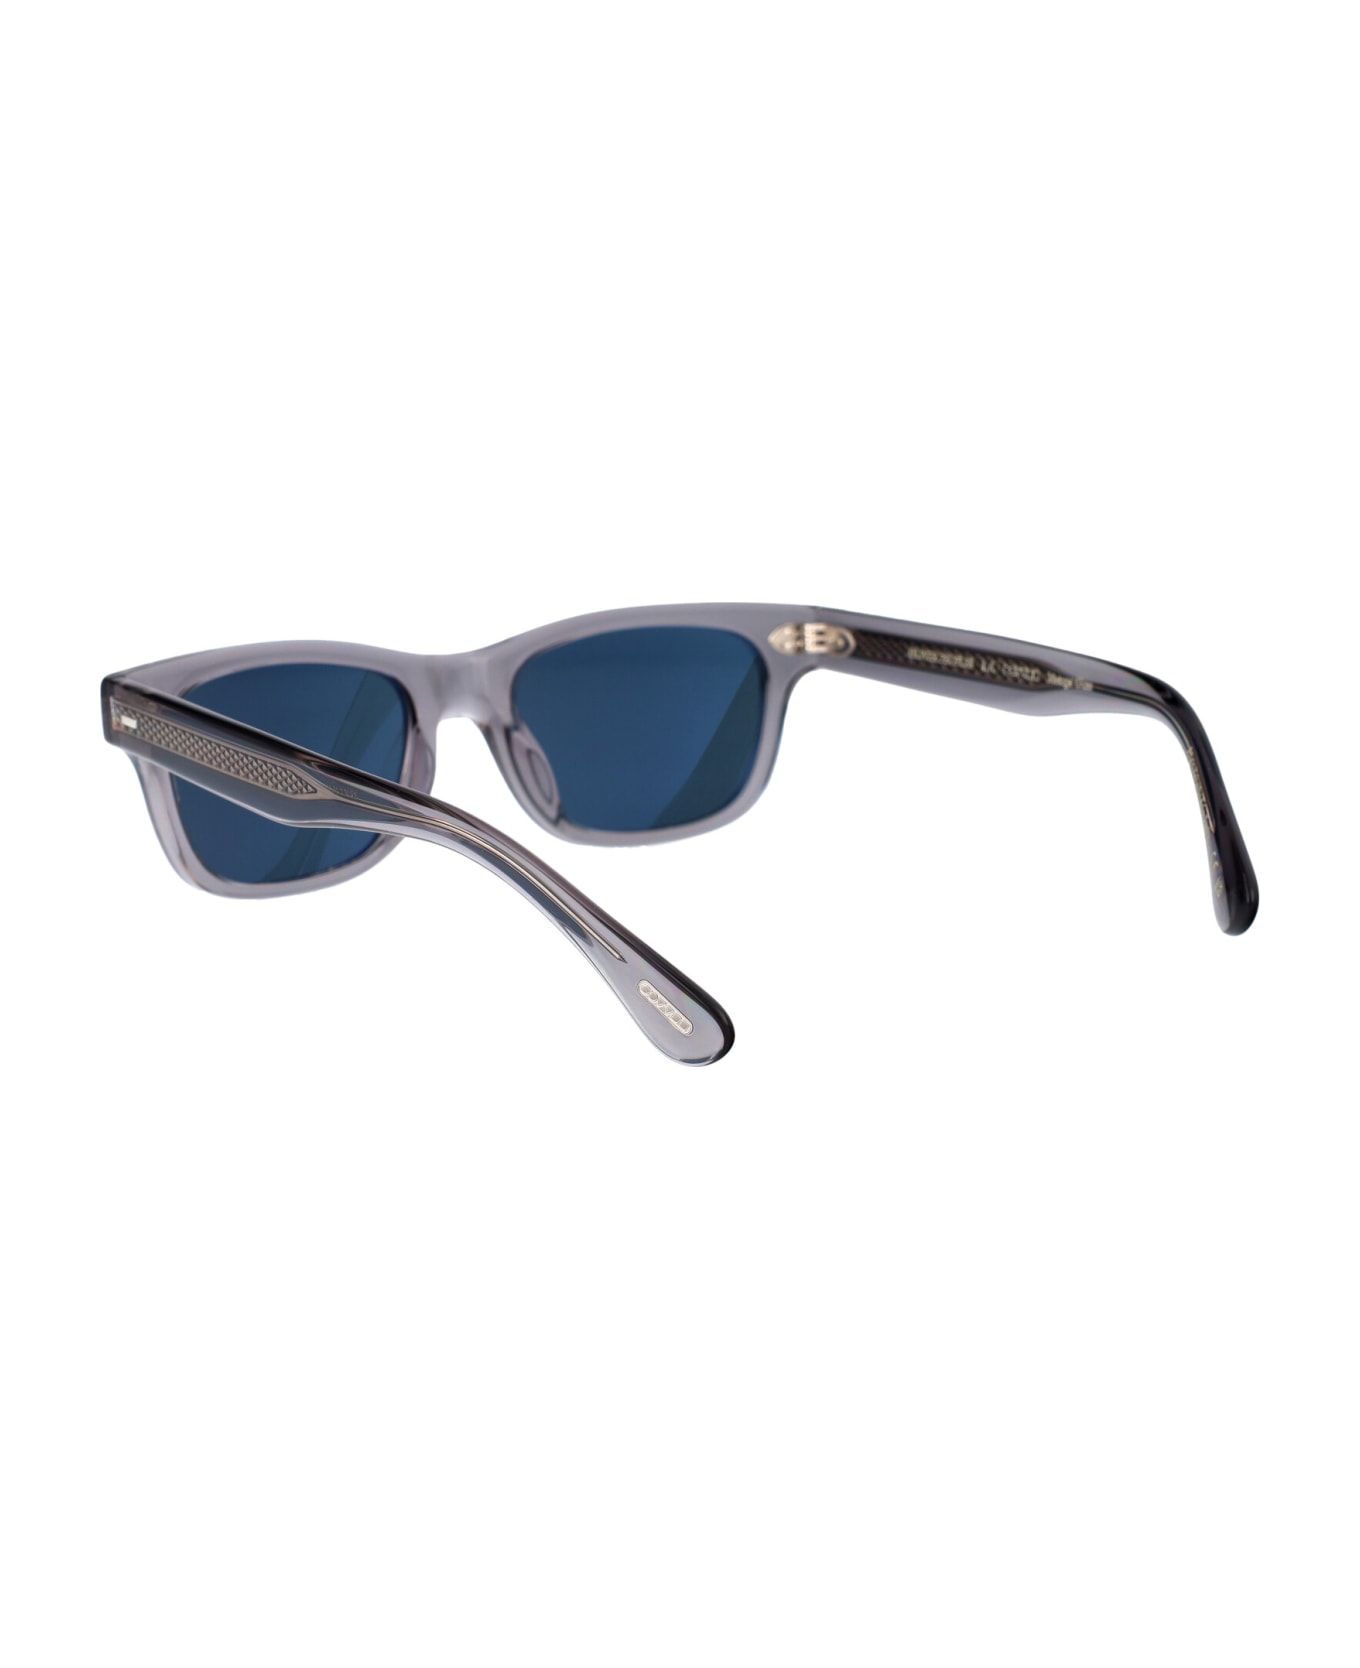 Oliver Peoples Rosson Sun Sunglasses - 1132W5 Workman Grey